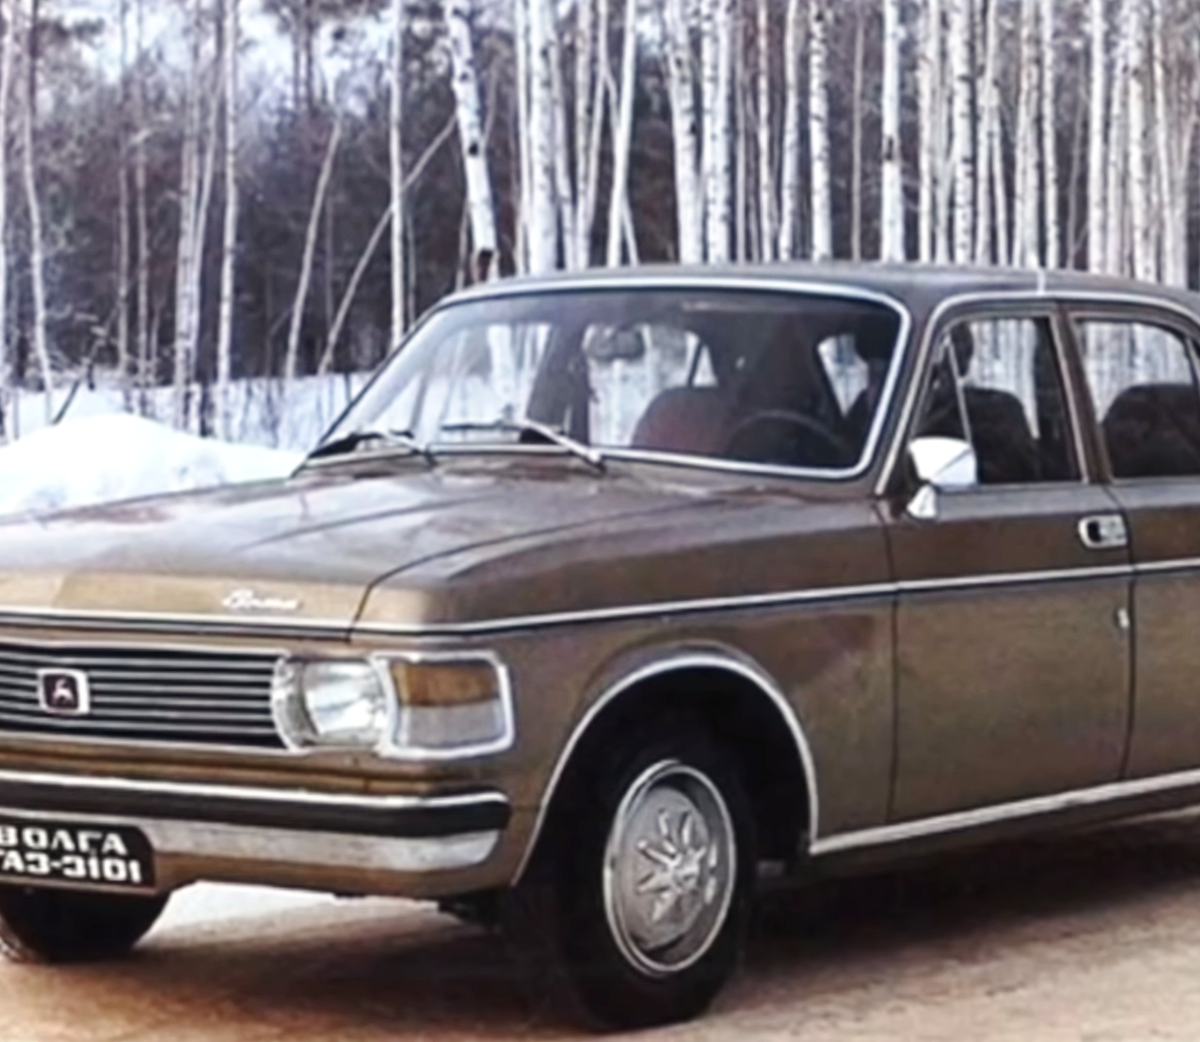 Cars for secret operations of the KGB